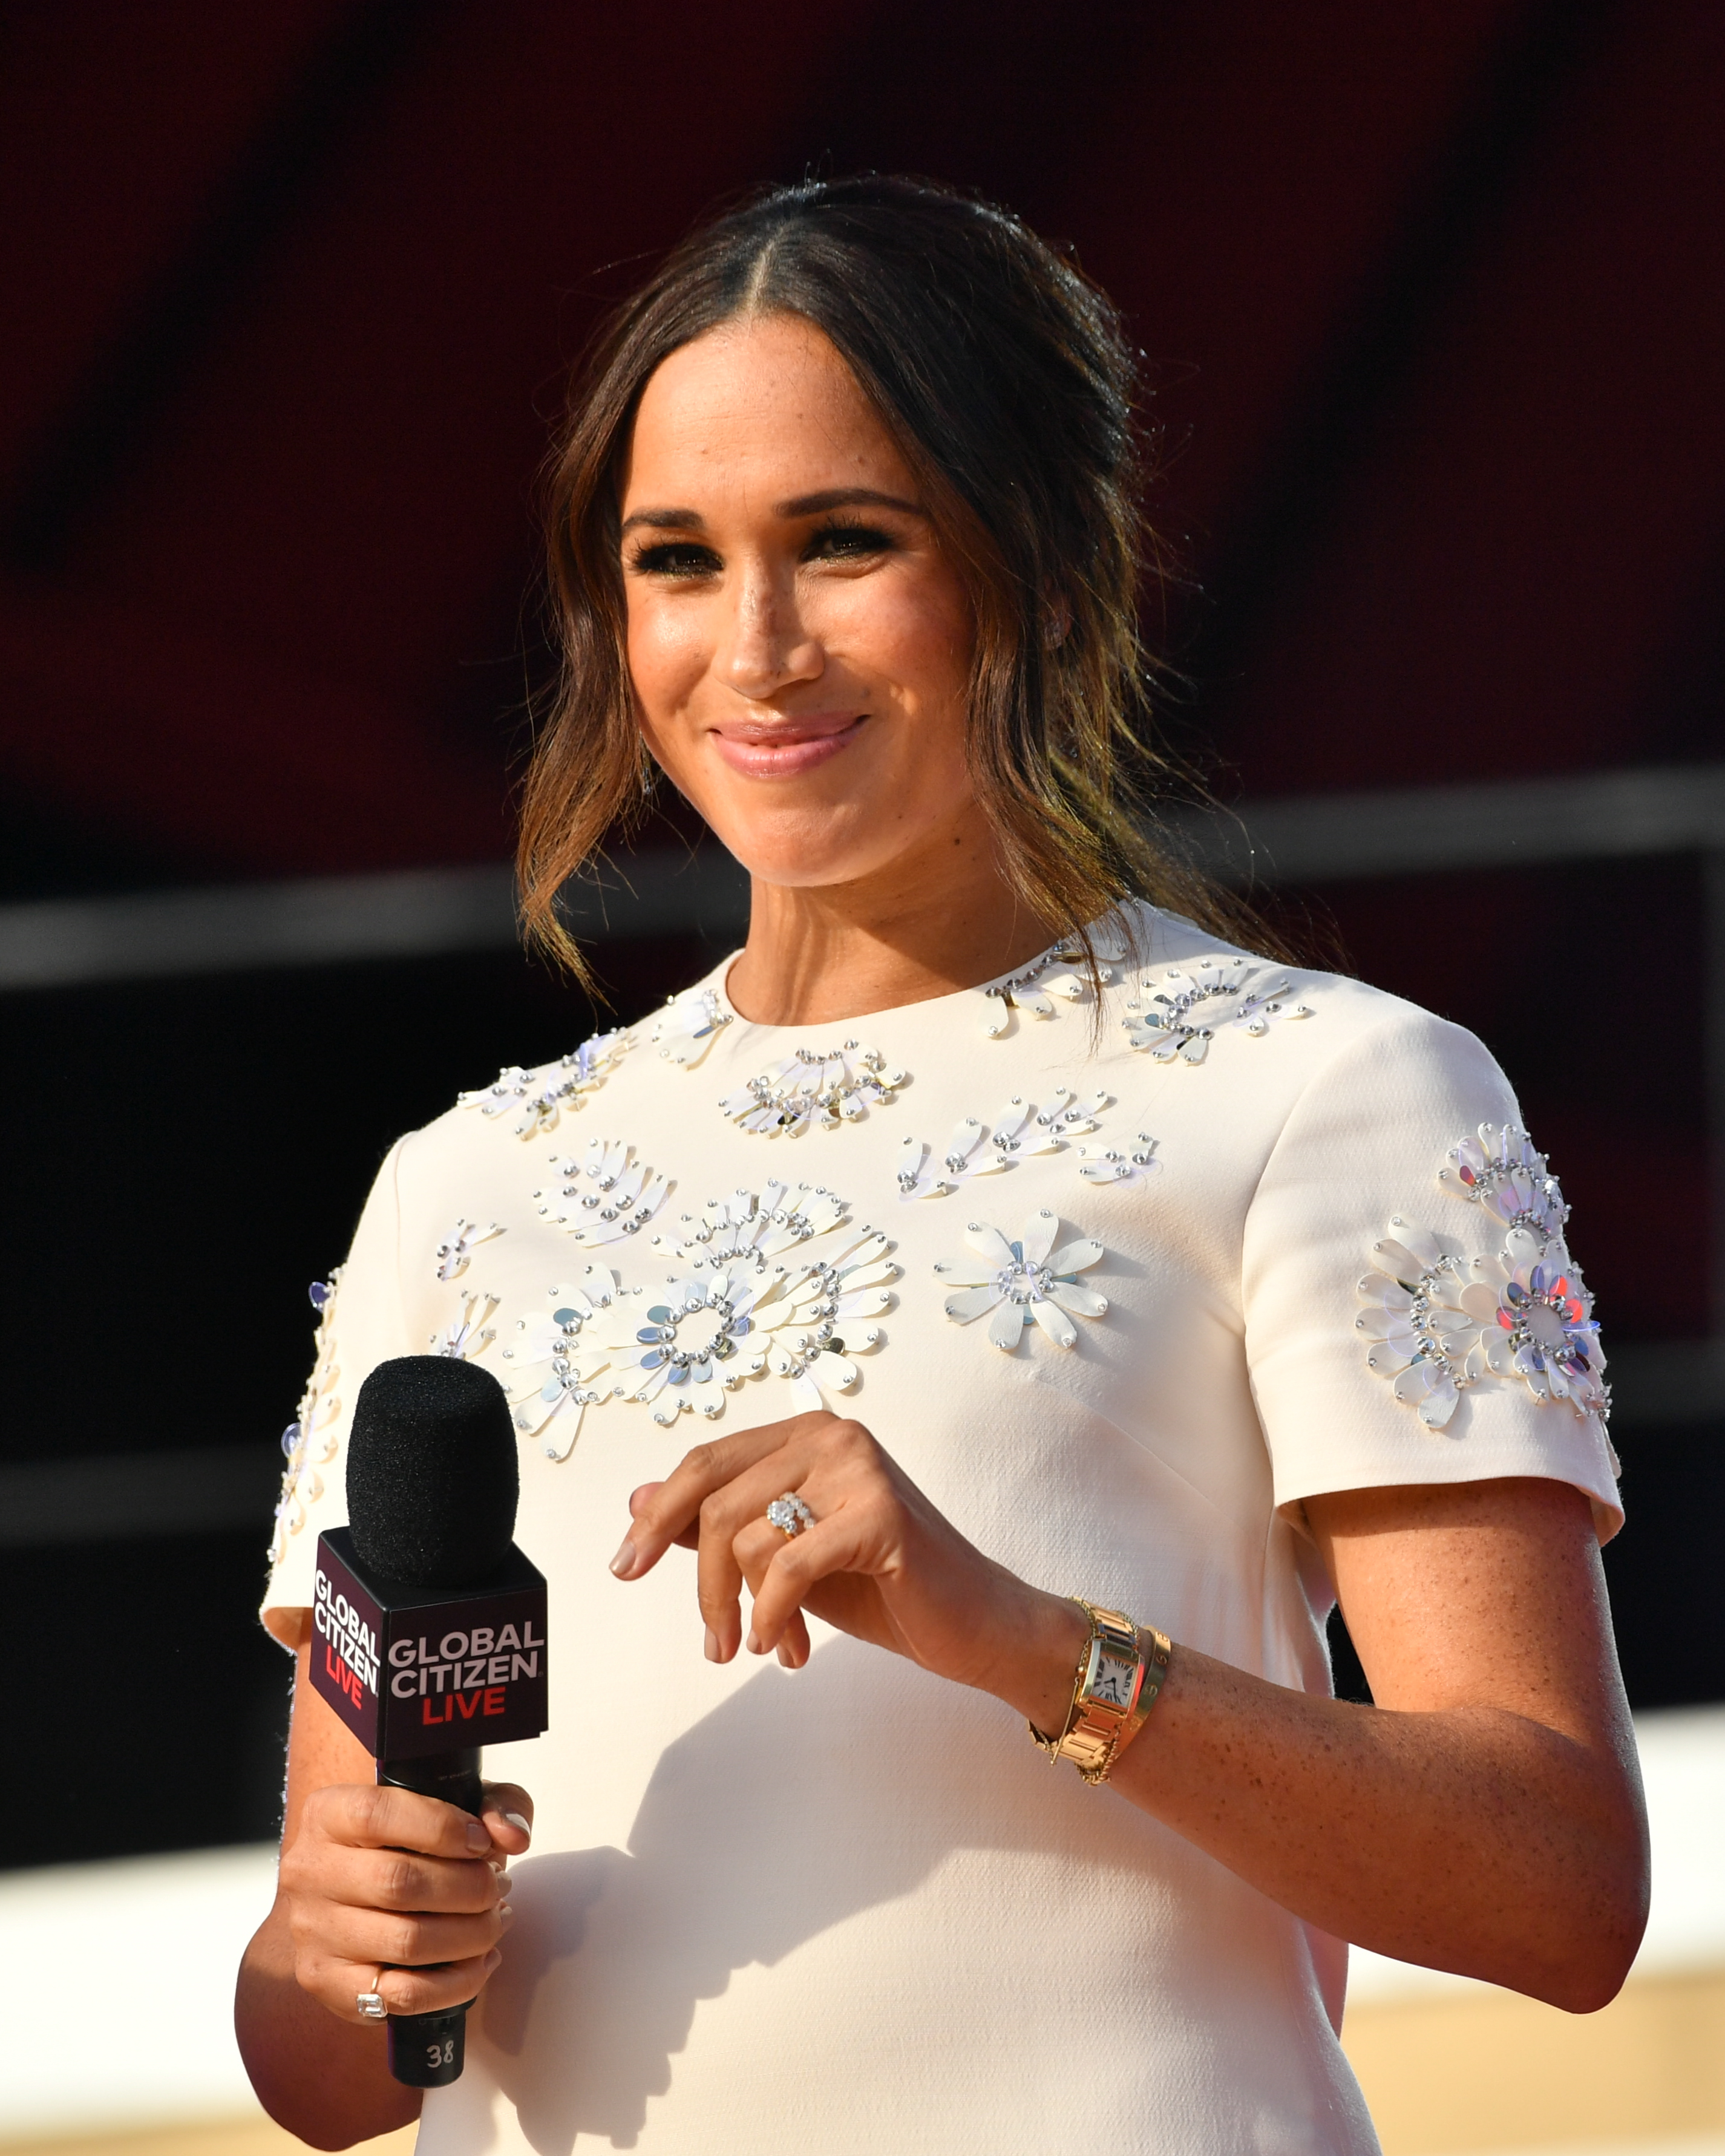 Meghan Markle at the Global Citizen Live event in New York City on September 25, 202 | Source: Getty Images